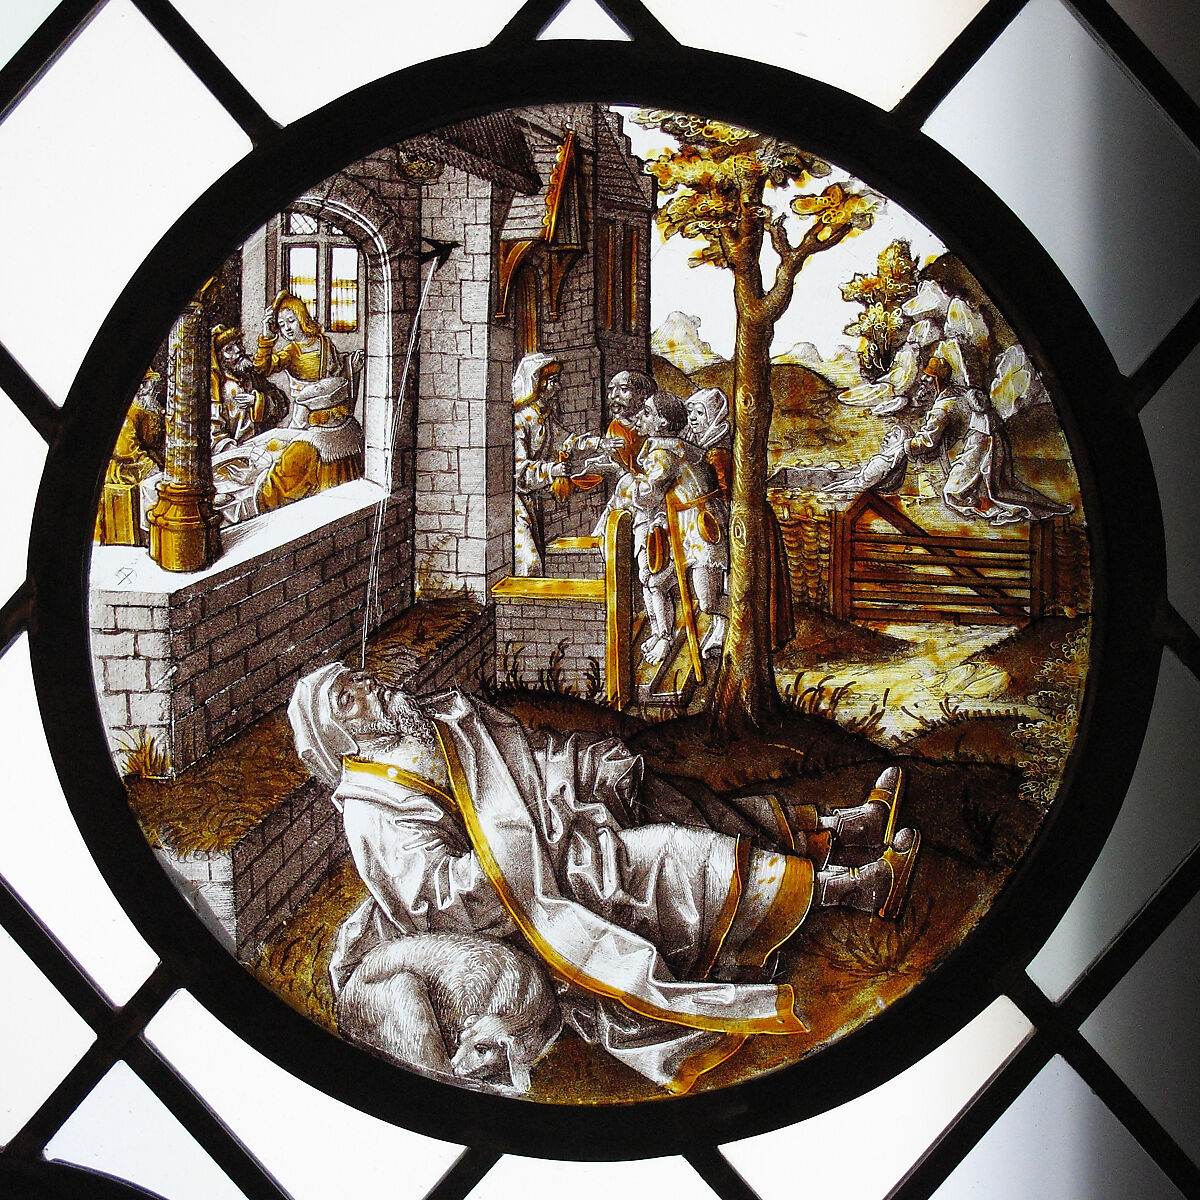 Roundel with the Blinding of Tobit (from a Series), Colorless glass, vitreous paint and silver stain, South Netherlandish 